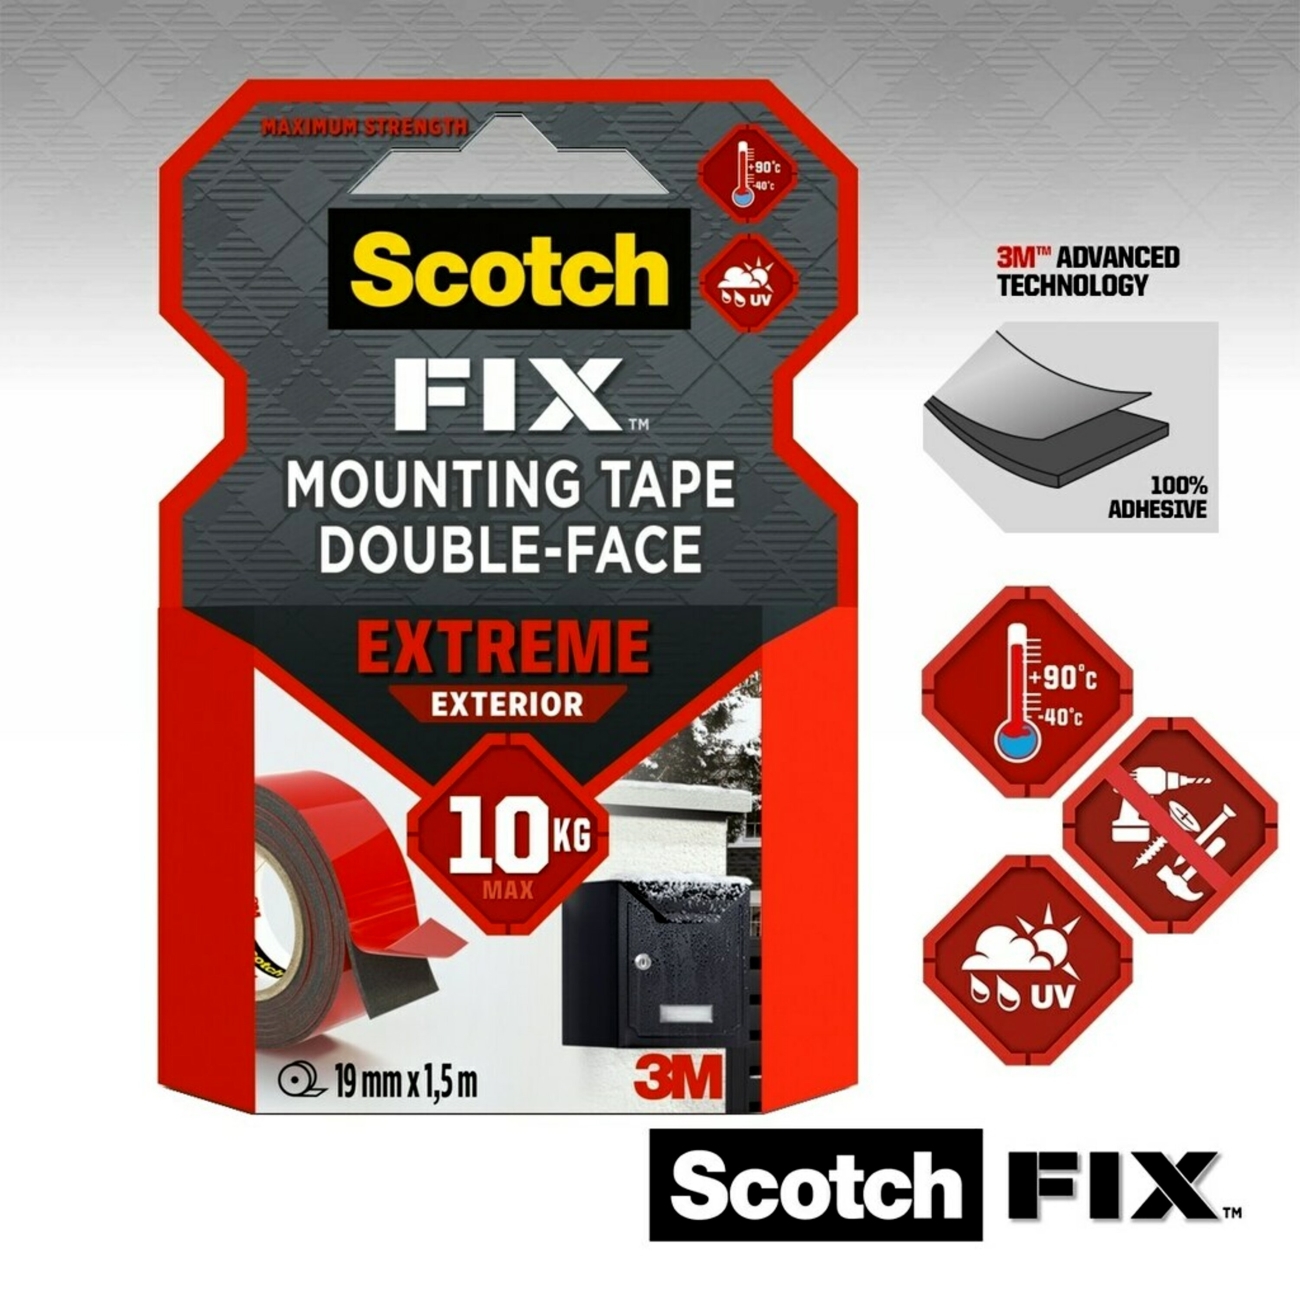 3M Scotch-Fix Extreme external mounting tape, 19 mm x 1.5 m, Holds up to 10 kg, 1 kg/15 cm